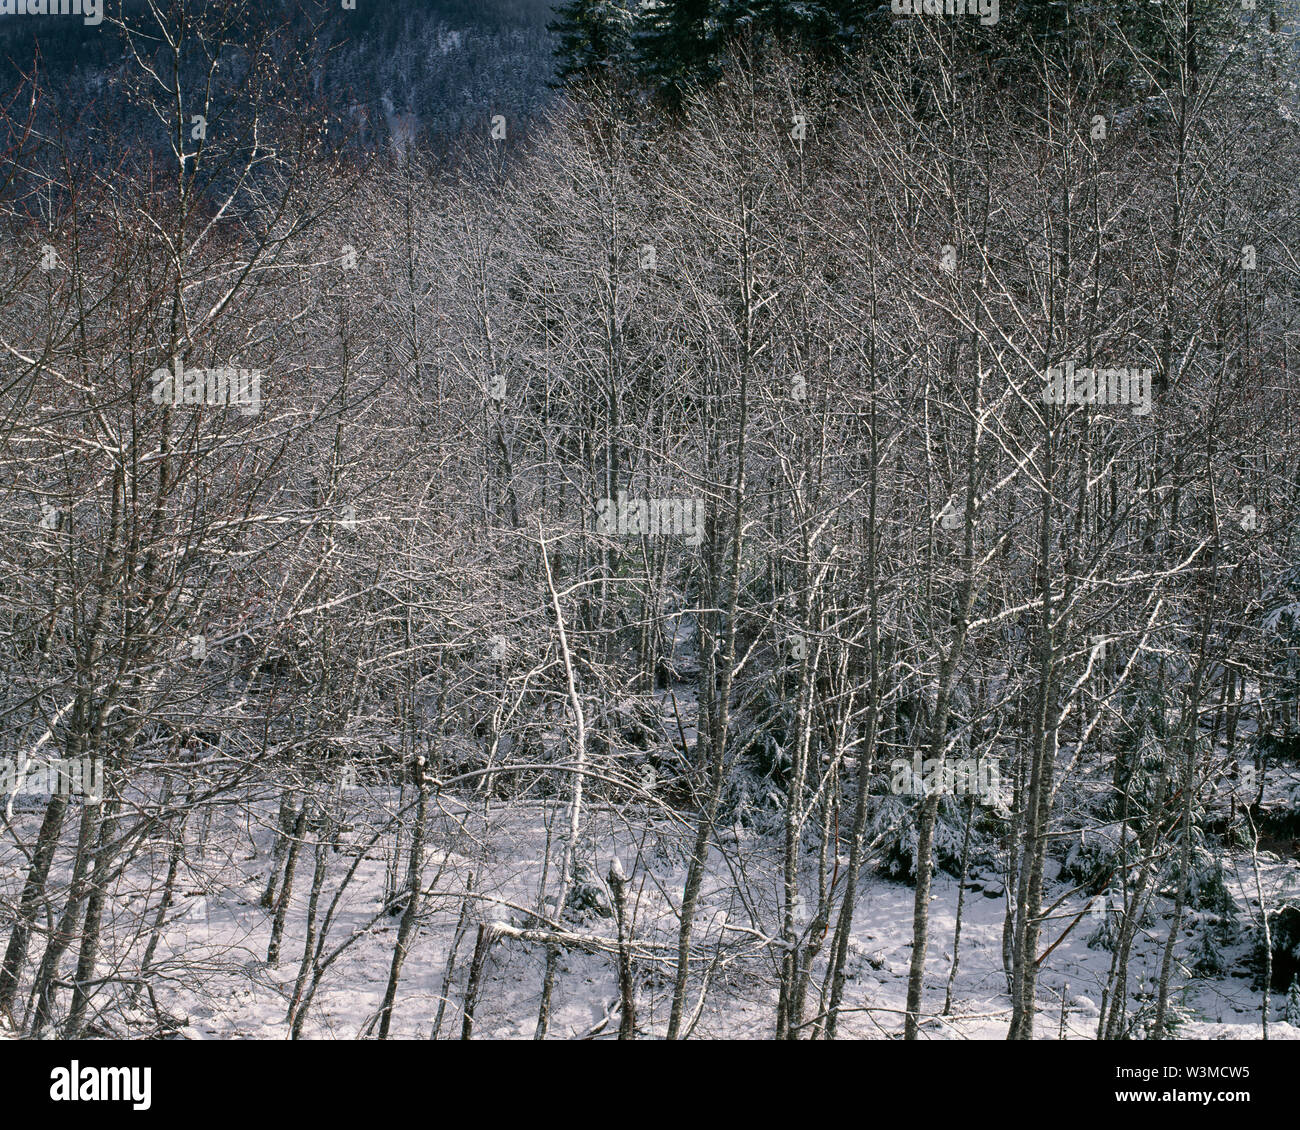 USA, Washington, Mt. Rainier National Park, Snow clings to grove of red alder in the Nisqually Valley. Stock Photo